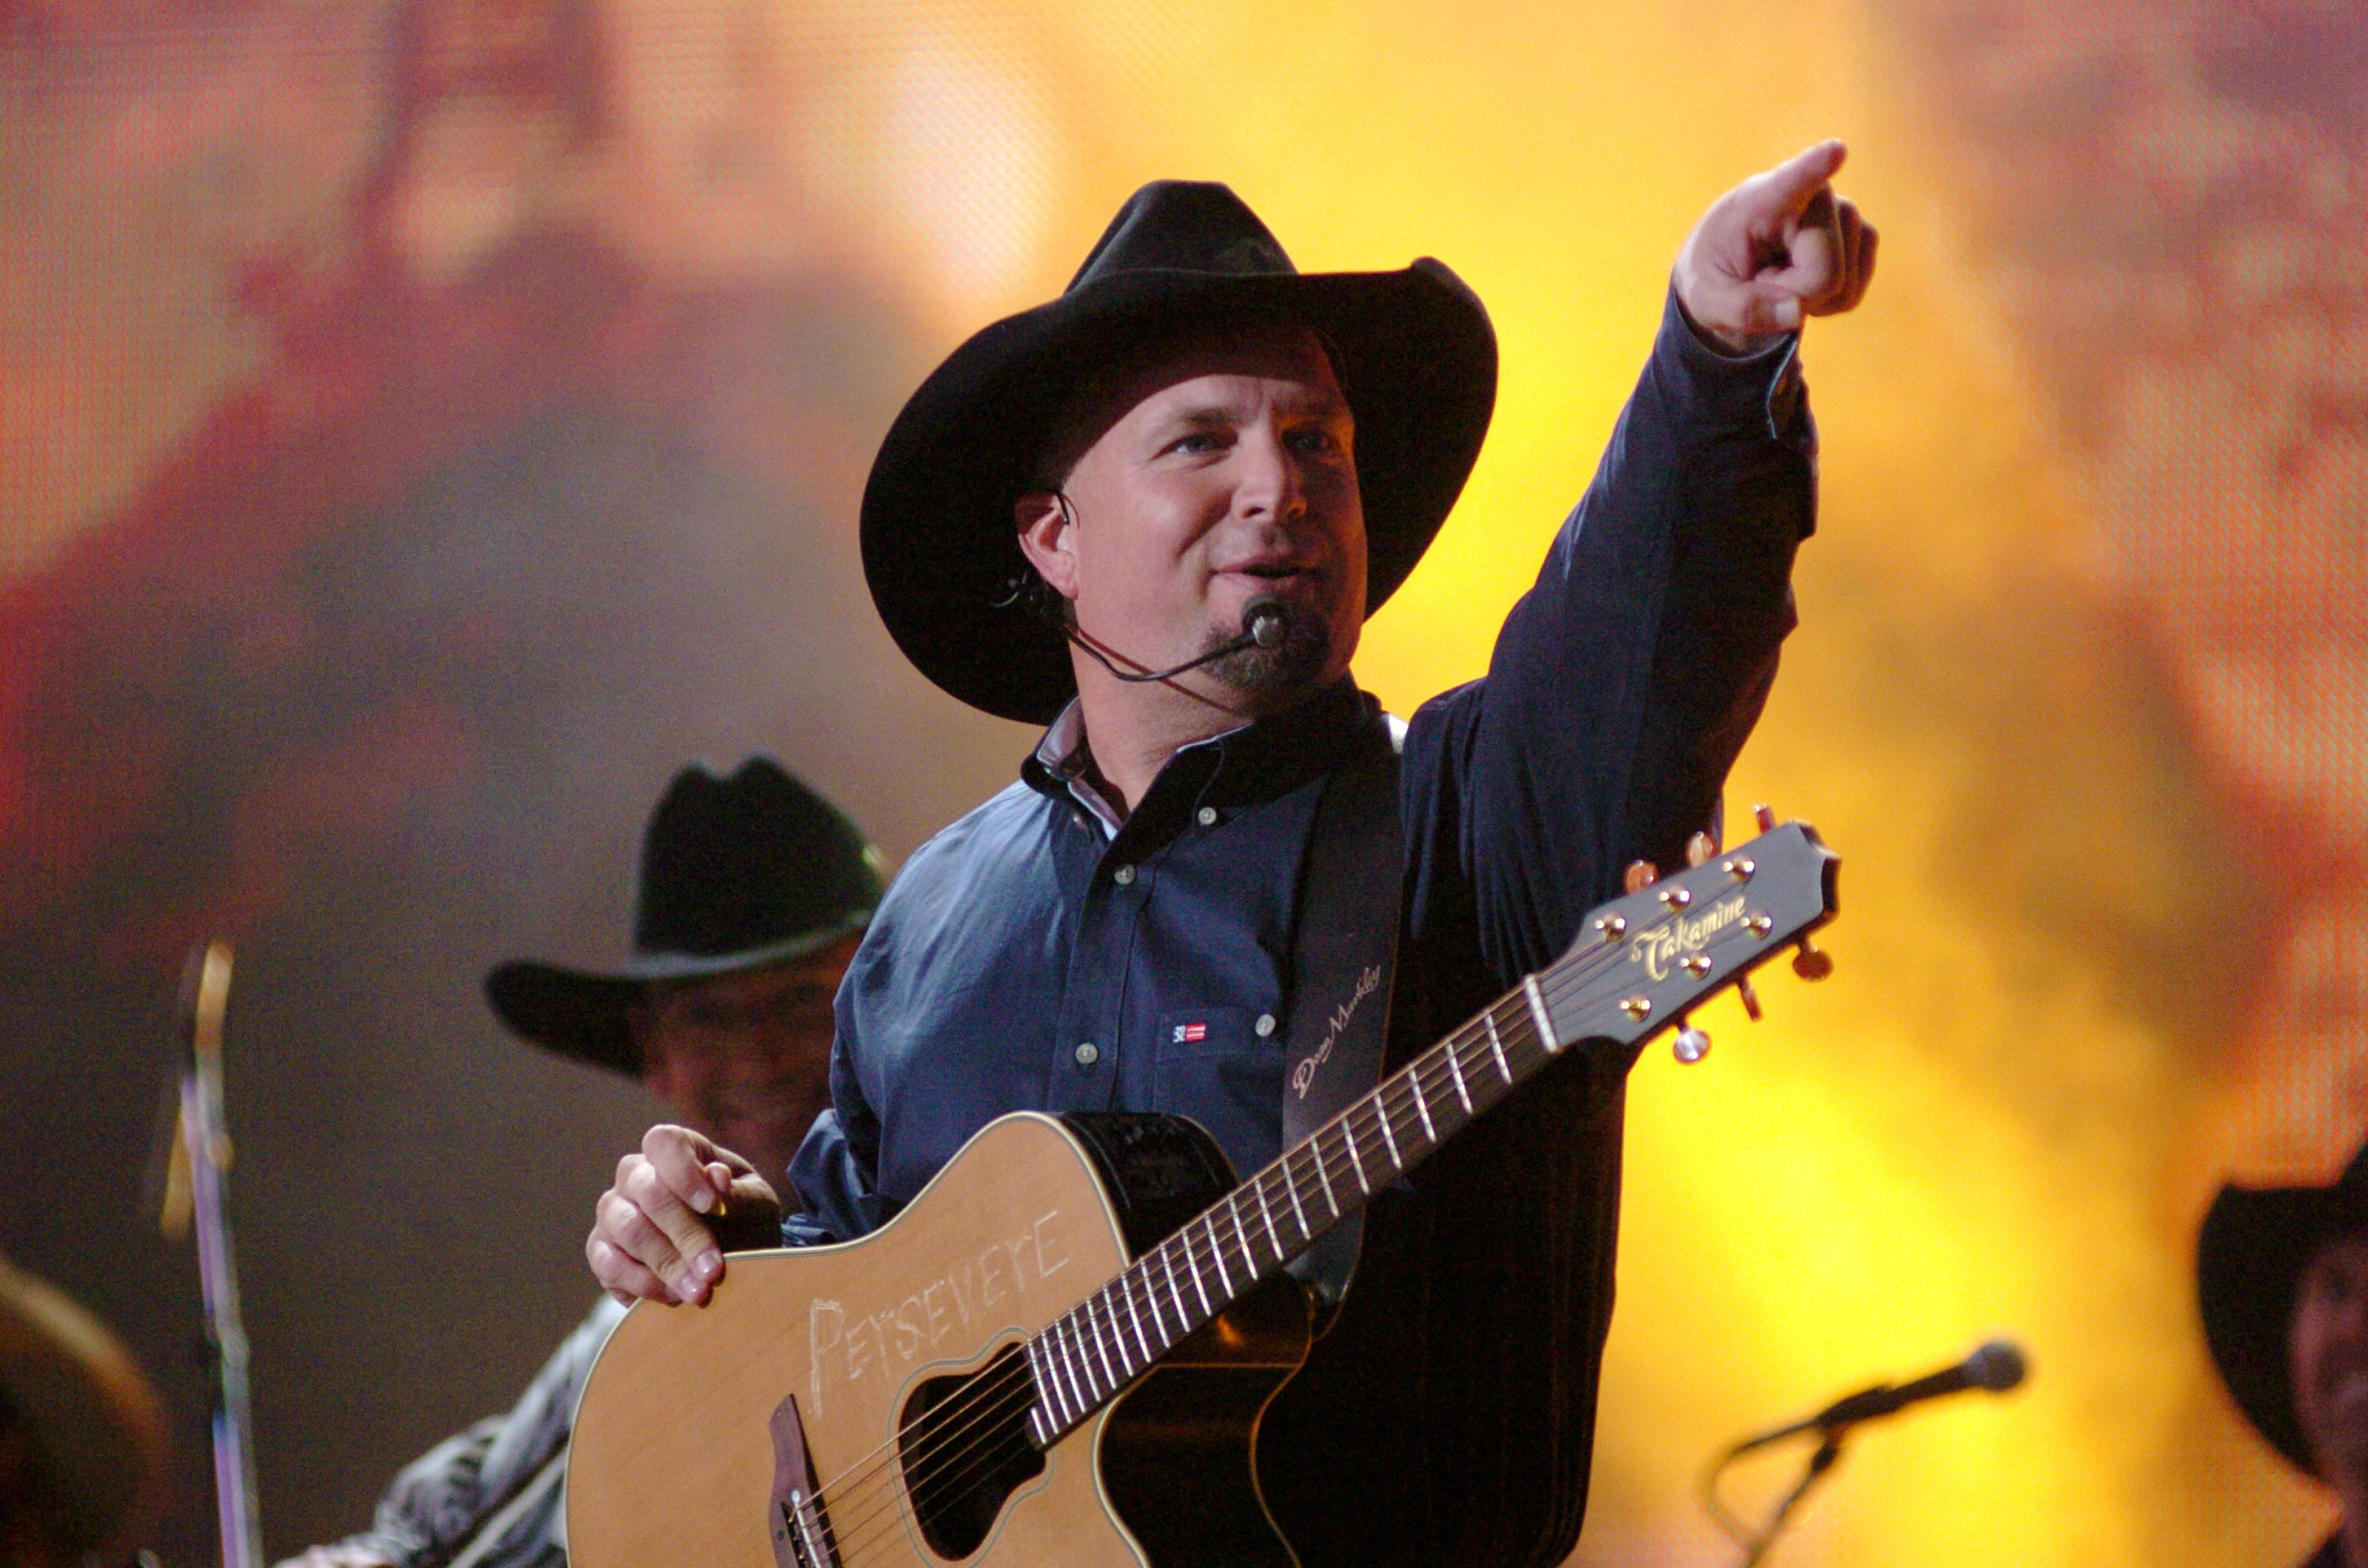 Garth Brooks cancels stadiums for dive bars over vaccine concerns.